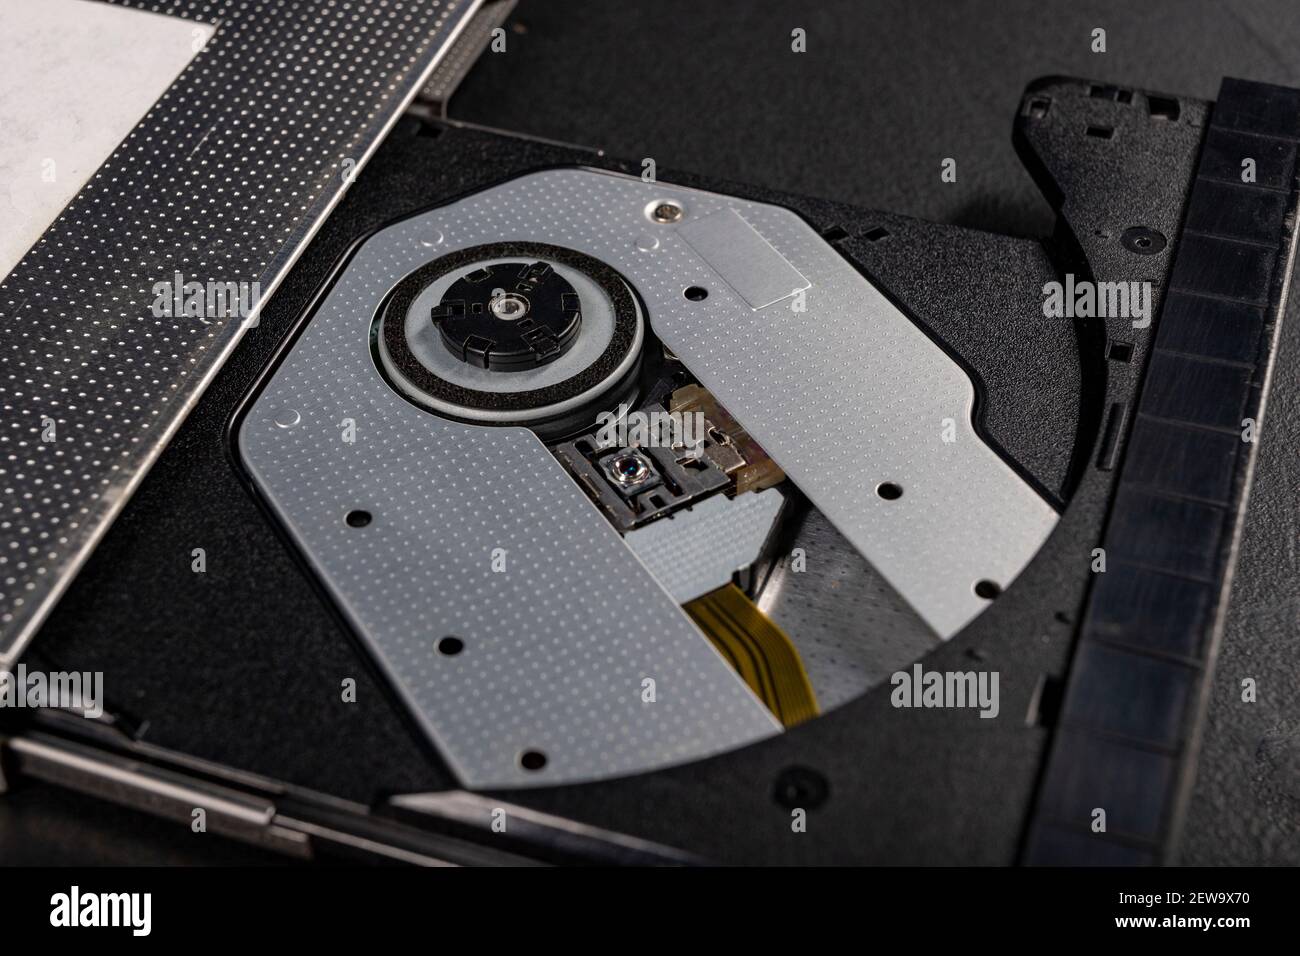 The inside of the CD reader. A laser mechanism for reading compact discs.  Dark background Stock Photo - Alamy